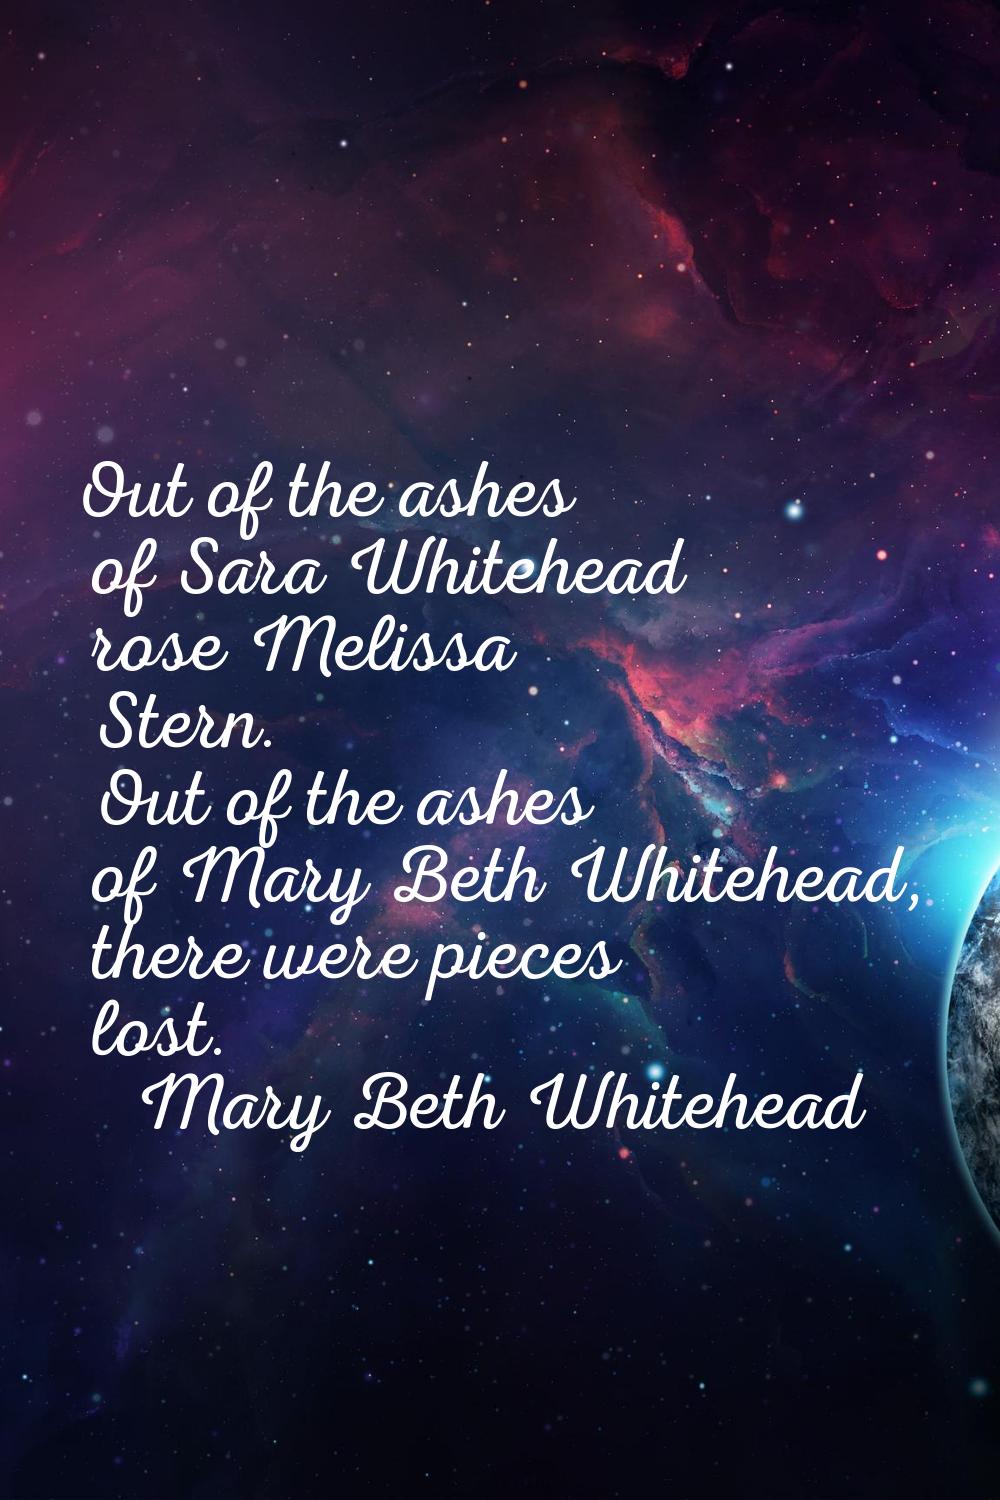 Out of the ashes of Sara Whitehead rose Melissa Stern. Out of the ashes of Mary Beth Whitehead, the